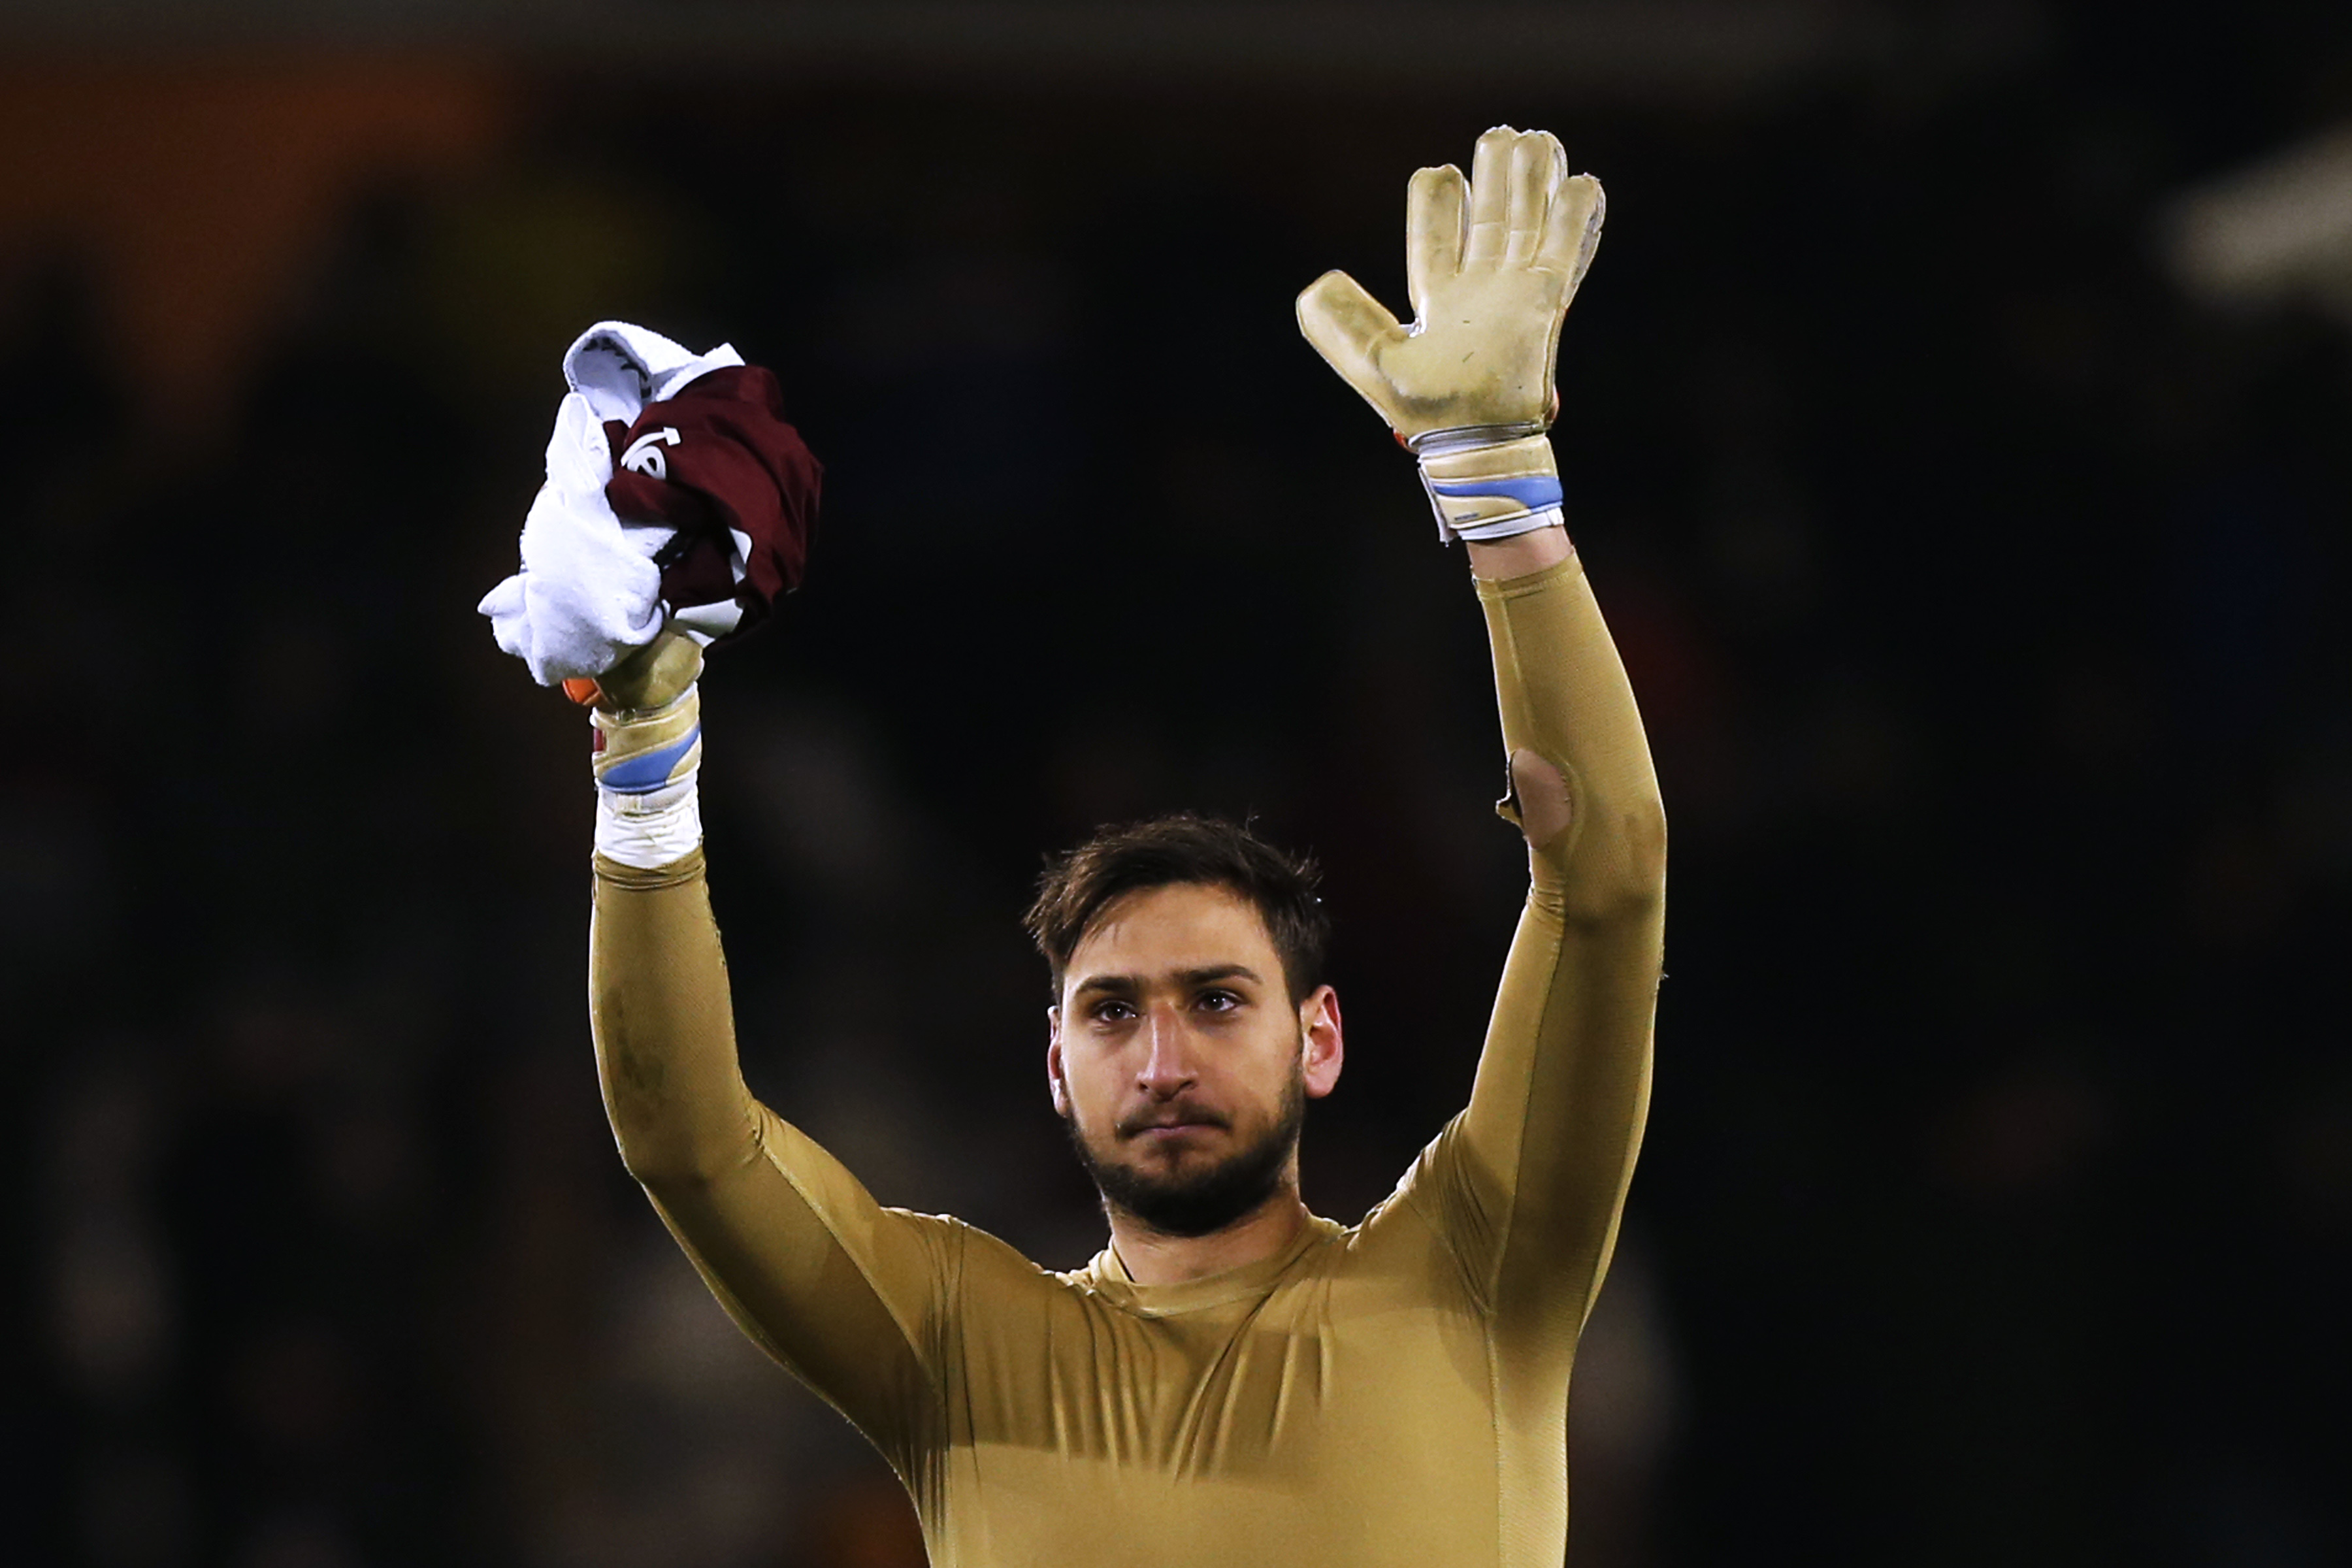 AC Milan's goalkeeper Gianluigi Donnarumma waves at the end of the Italian Serie A football match between Torino and AC Milan on January 16, 2017, at the Grande Torino Stadium in Turin. / AFP / MARCO BERTORELLO        (Photo credit should read MARCO BERTORELLO/AFP/Getty Images)